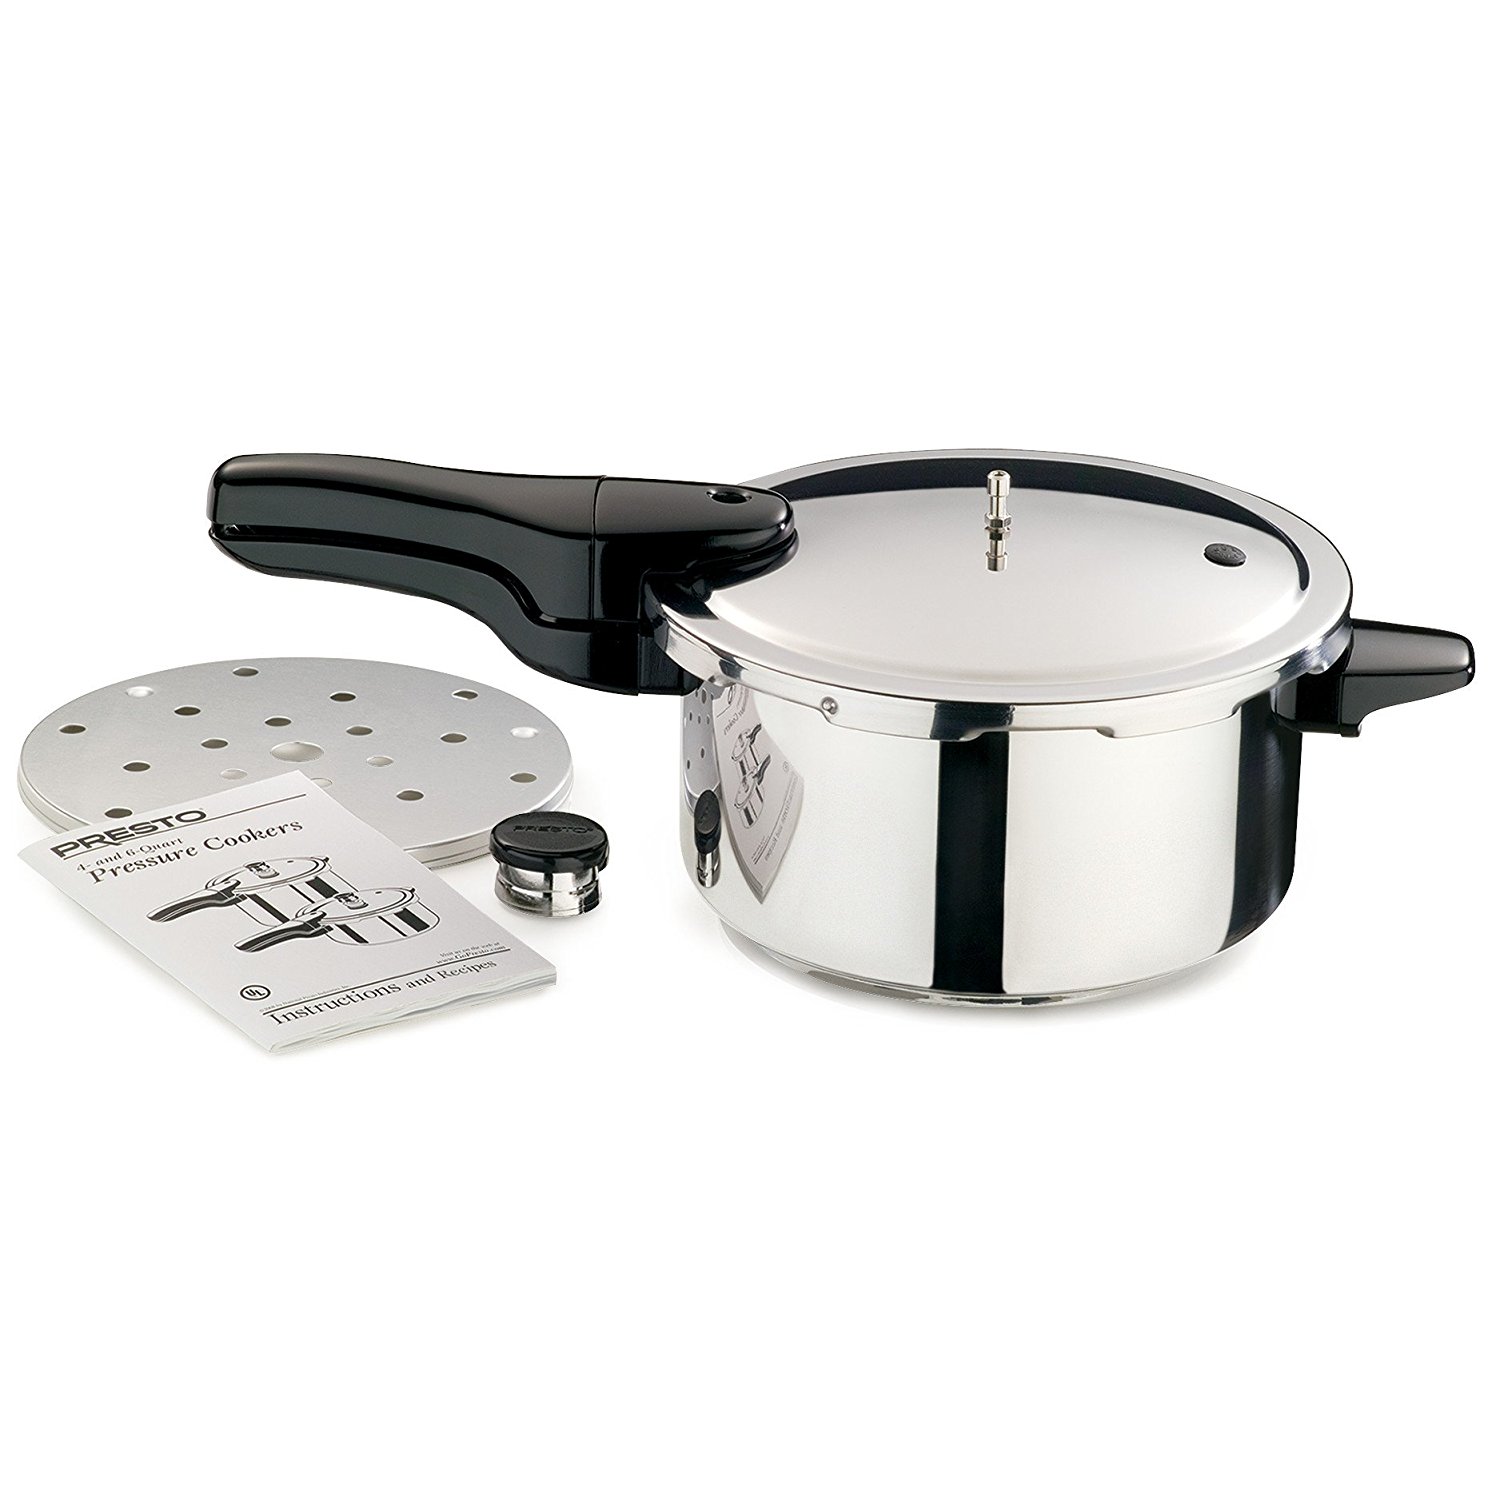 Picture of Presto 01341 4-QUART STAINLESS STEEL PRESSURE COOKER